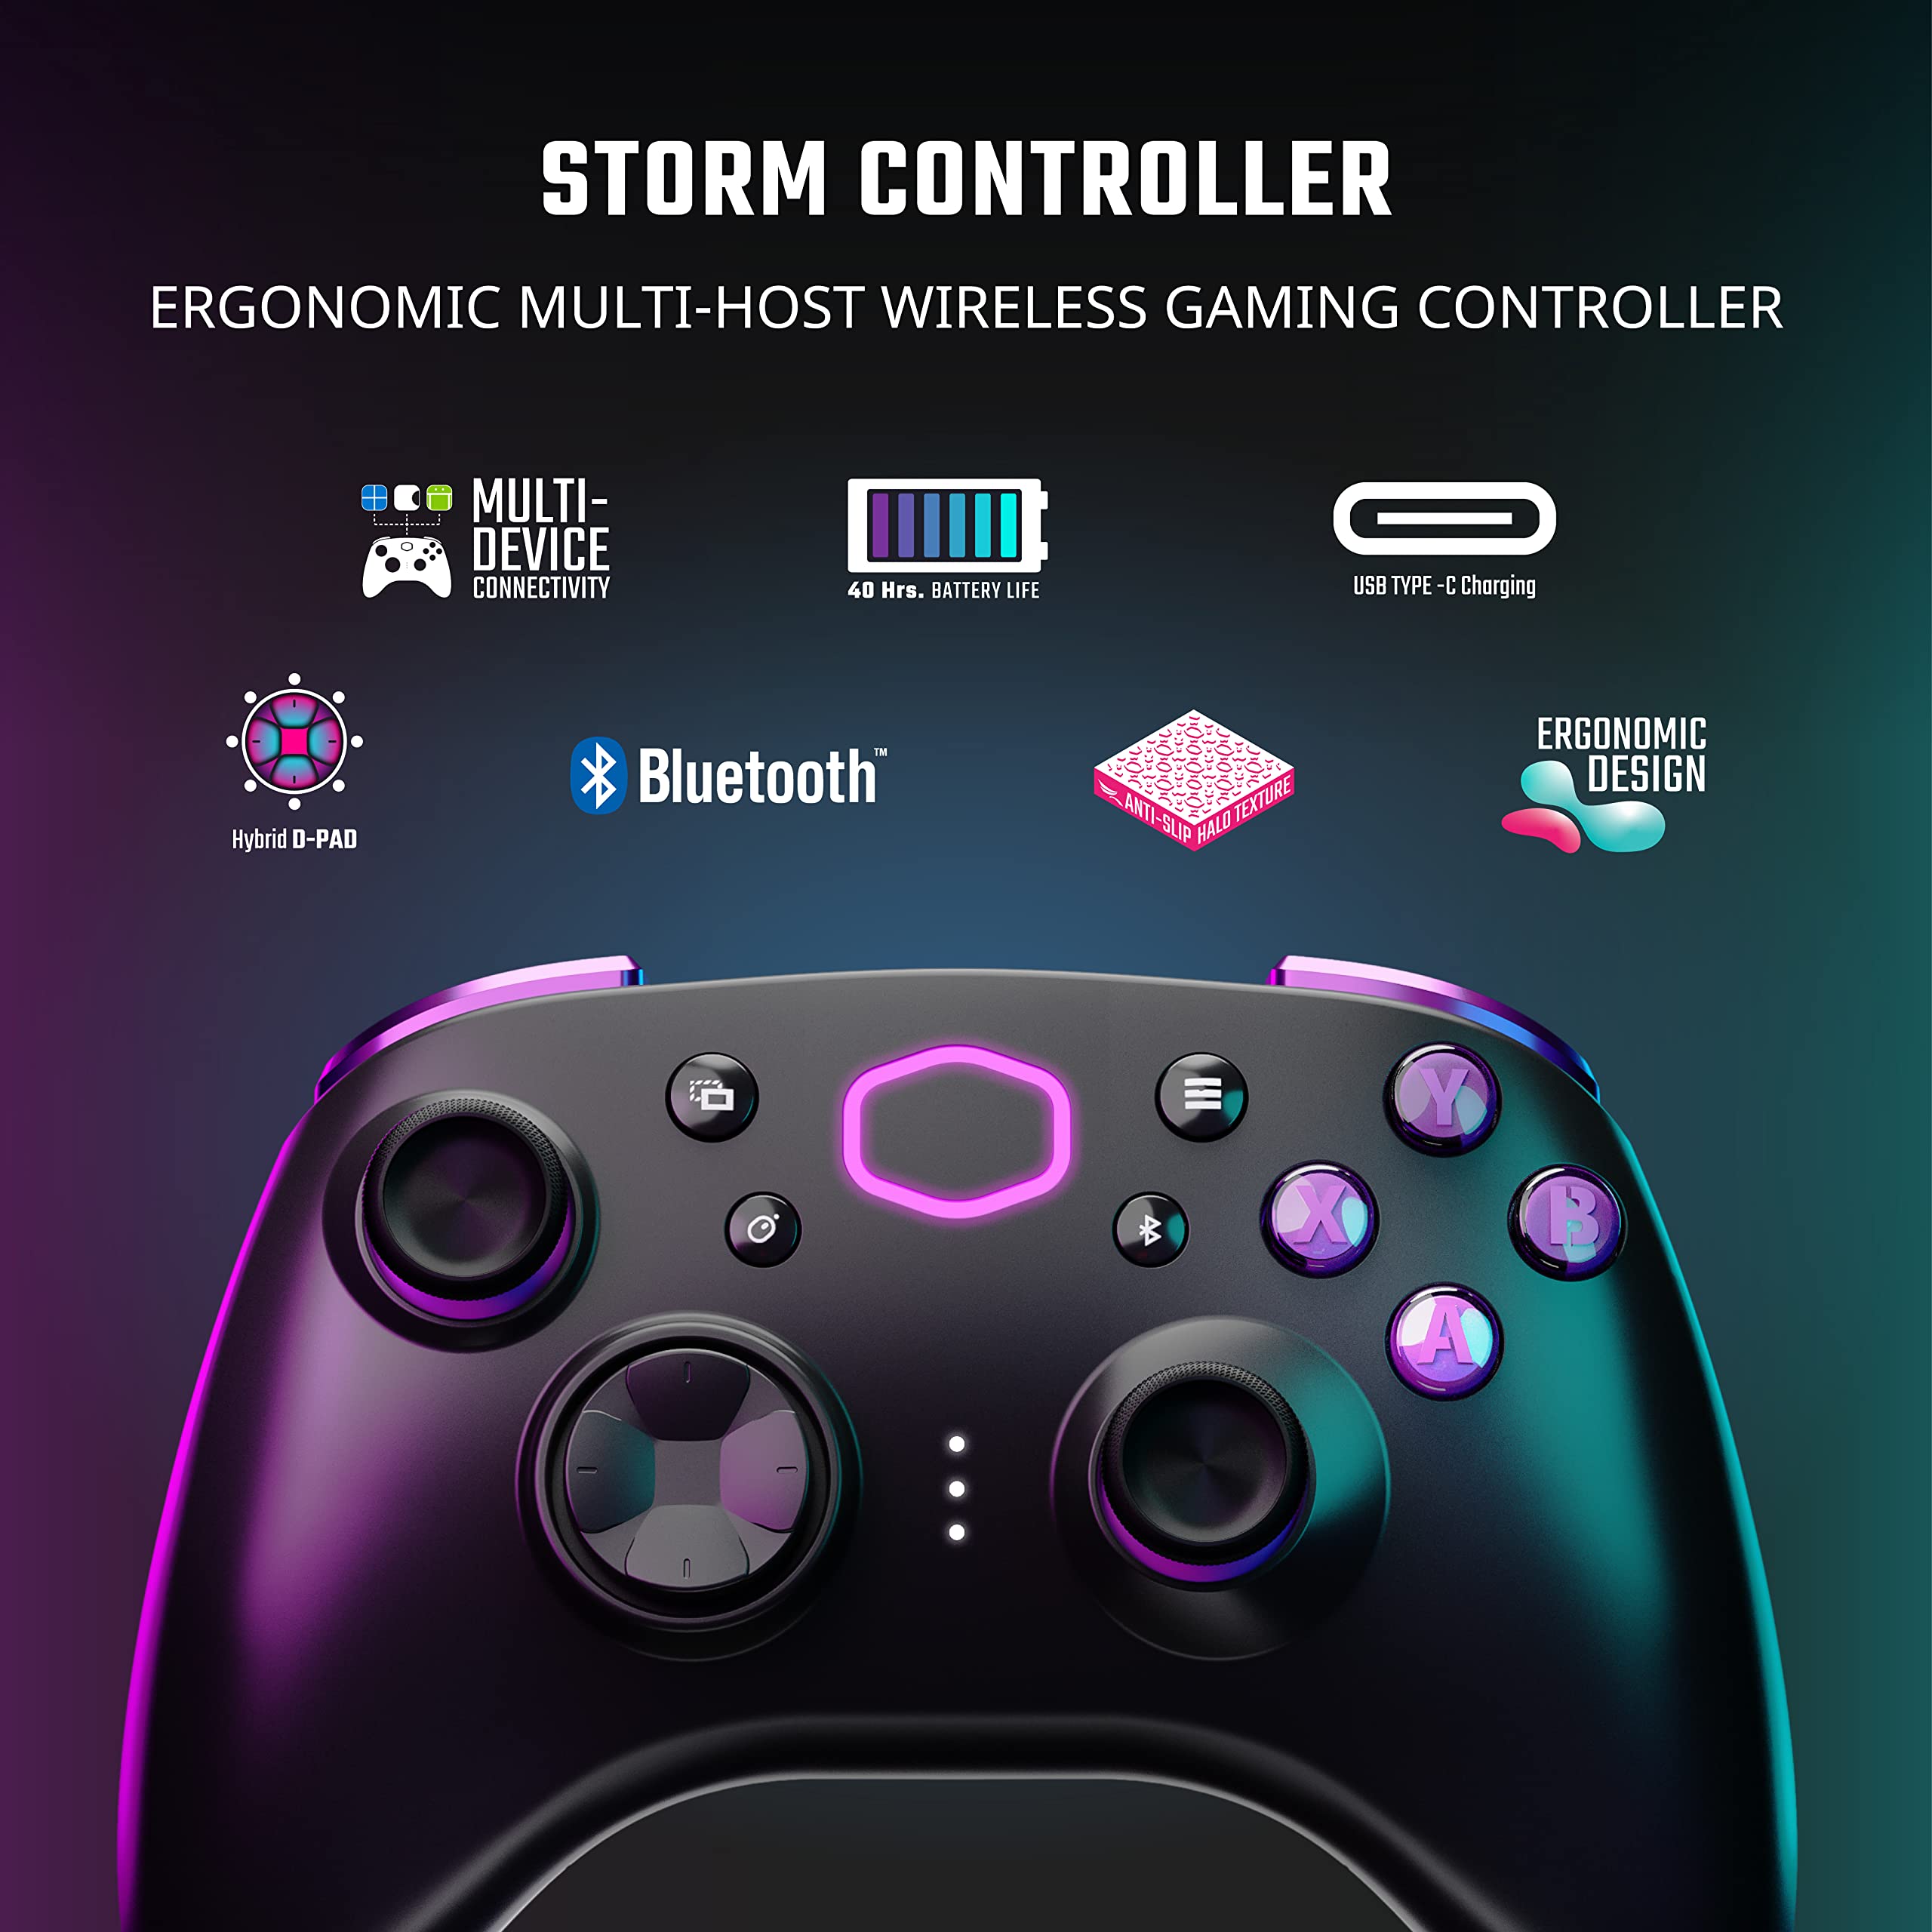 Cooler Master Storm Controller - Wireless Multi-Device Controller with Hybrid D-Pad and 40 Hour Battery Life for PC, OTT Box - Black